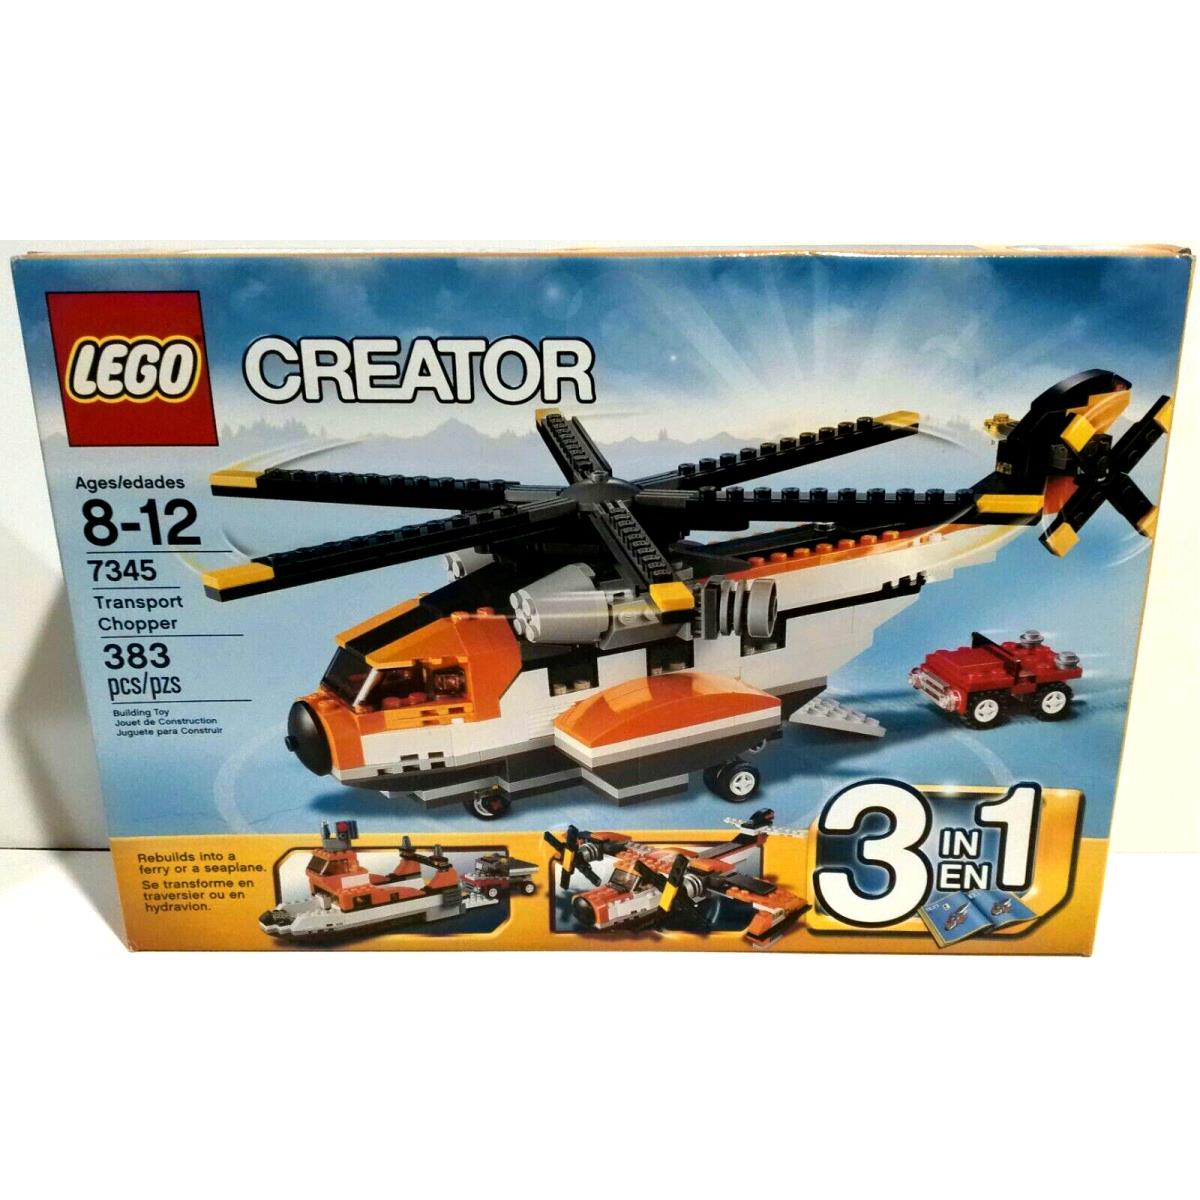 Lego Creator 7345 Transport Chopper 3 IN 1 Building Toy Complete w/ Box